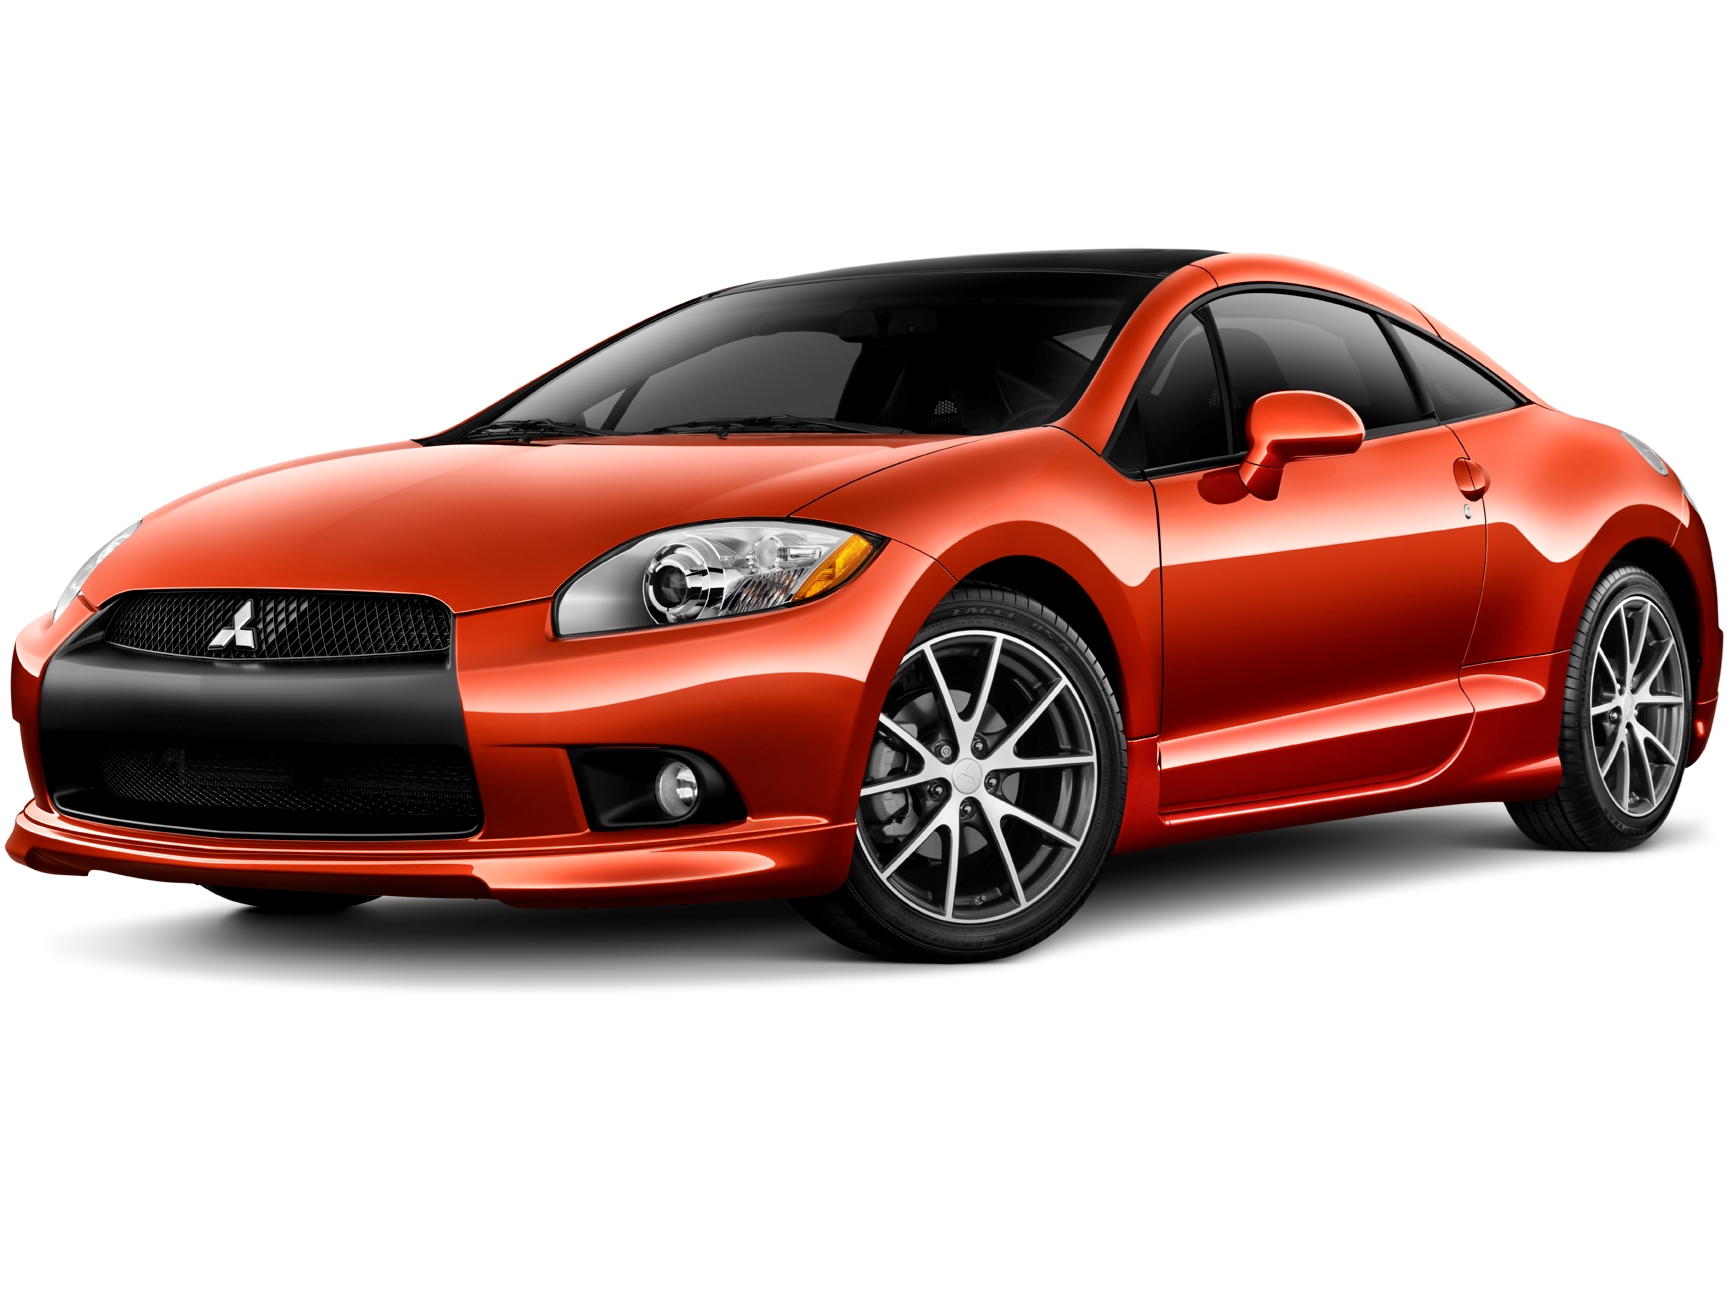 2011 Mitsubishi Eclipse GS Coupe Full Specs, Features and Price | CarBuzz